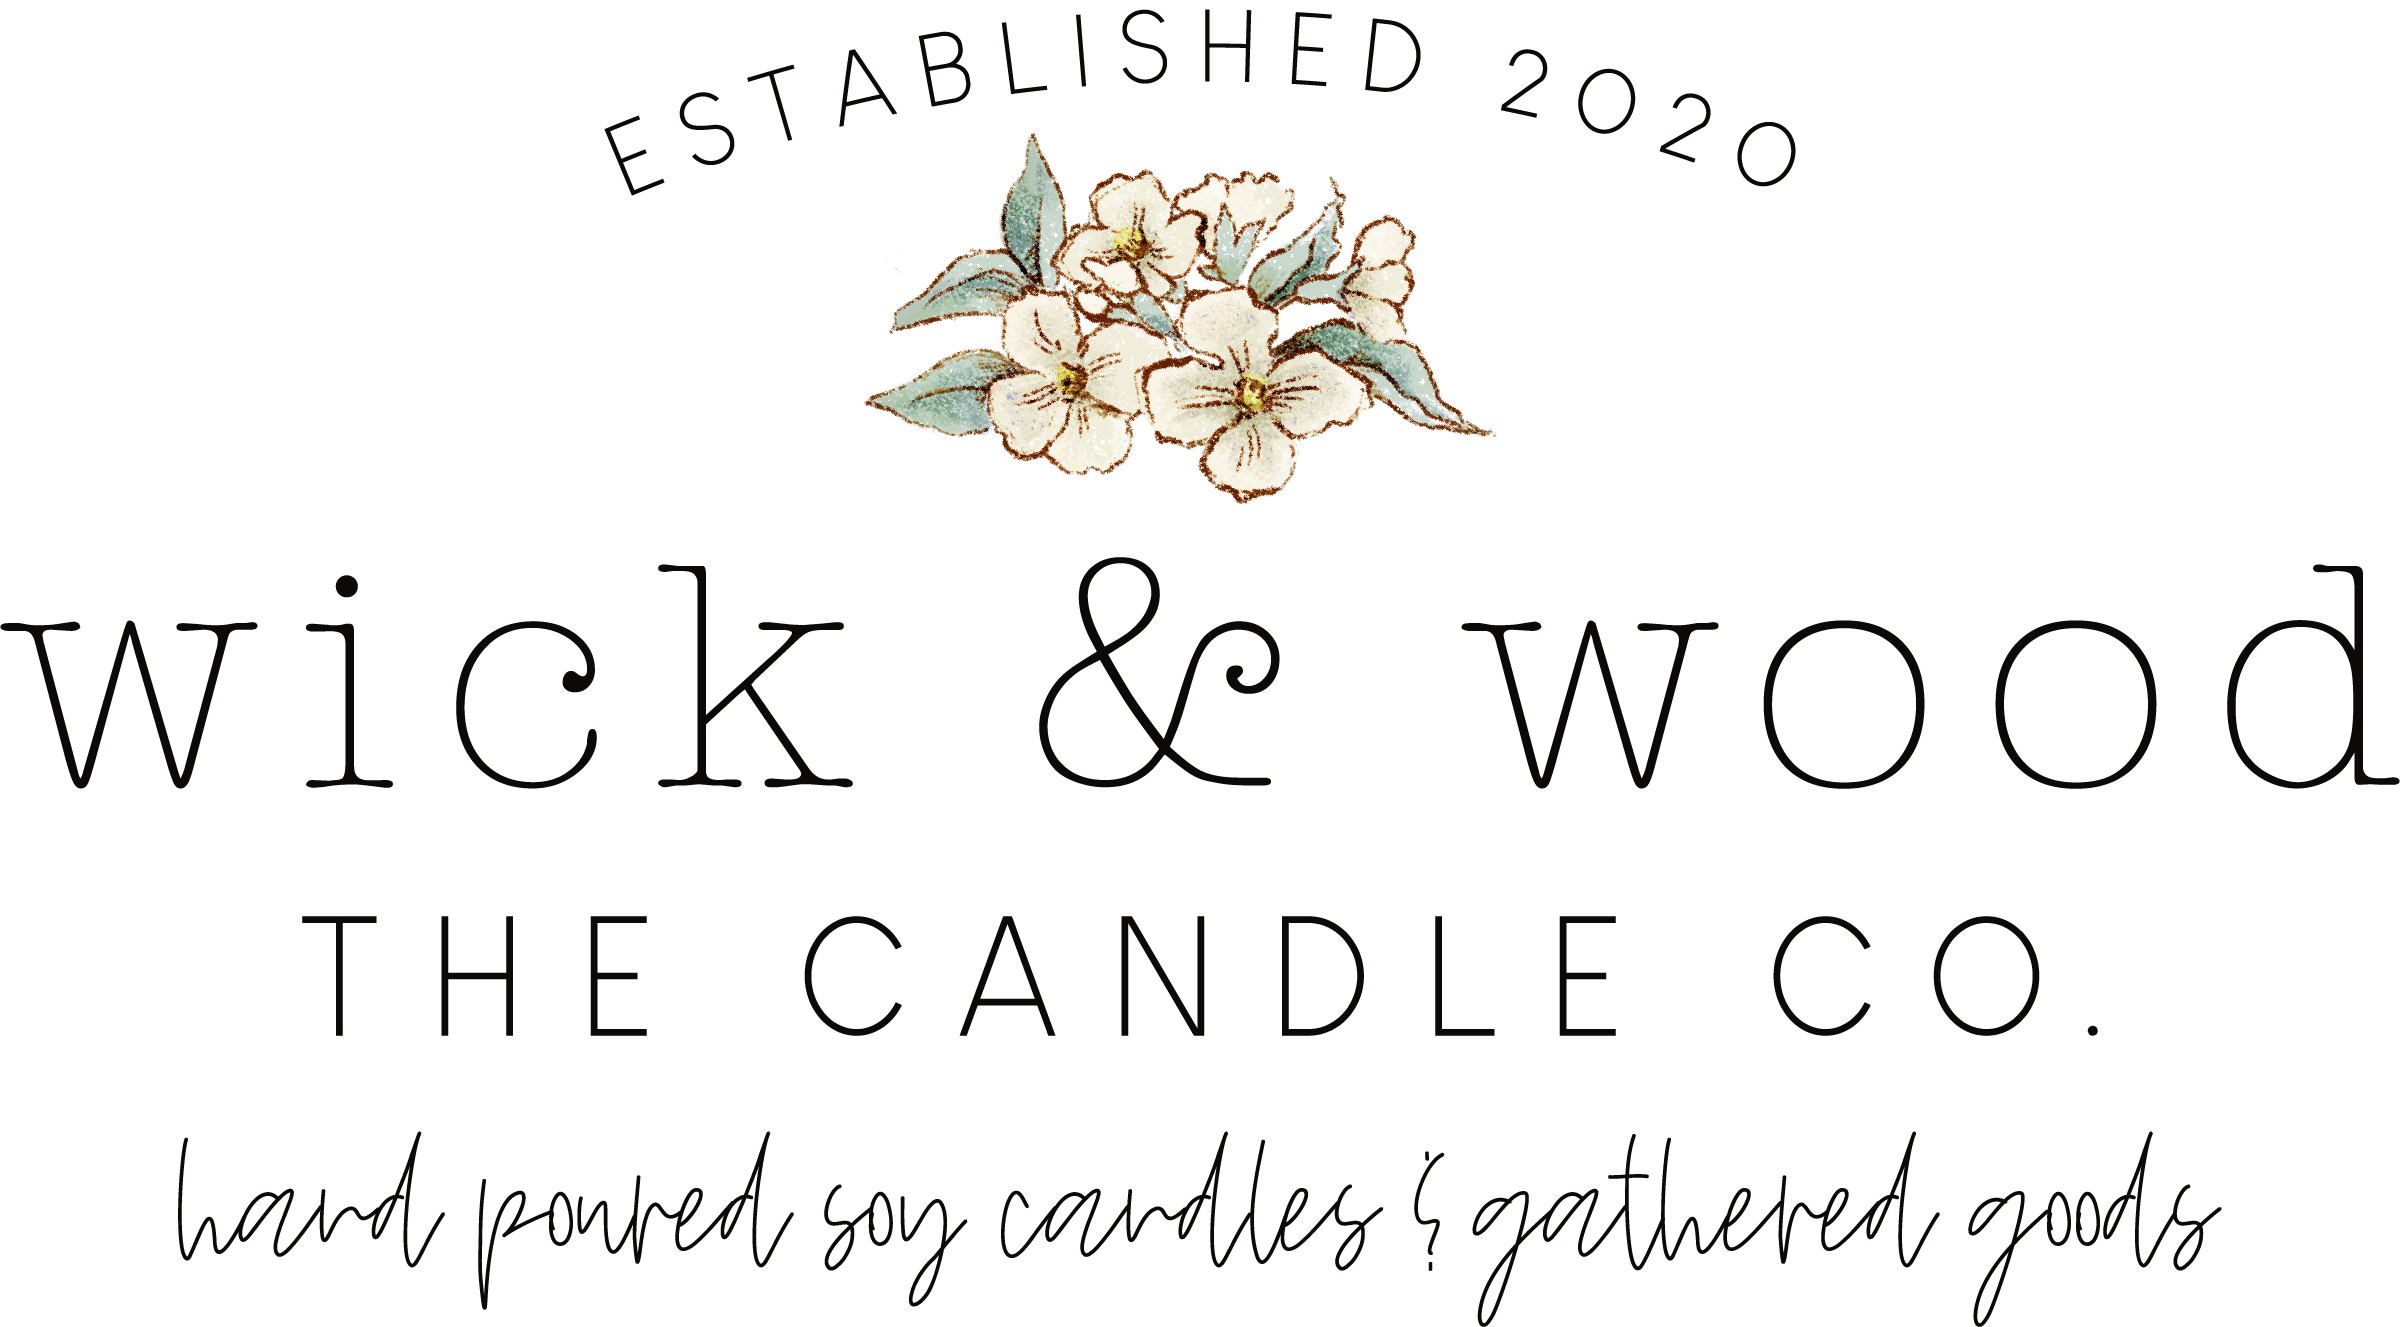 why wooden wicks? — Sable Candle Co.